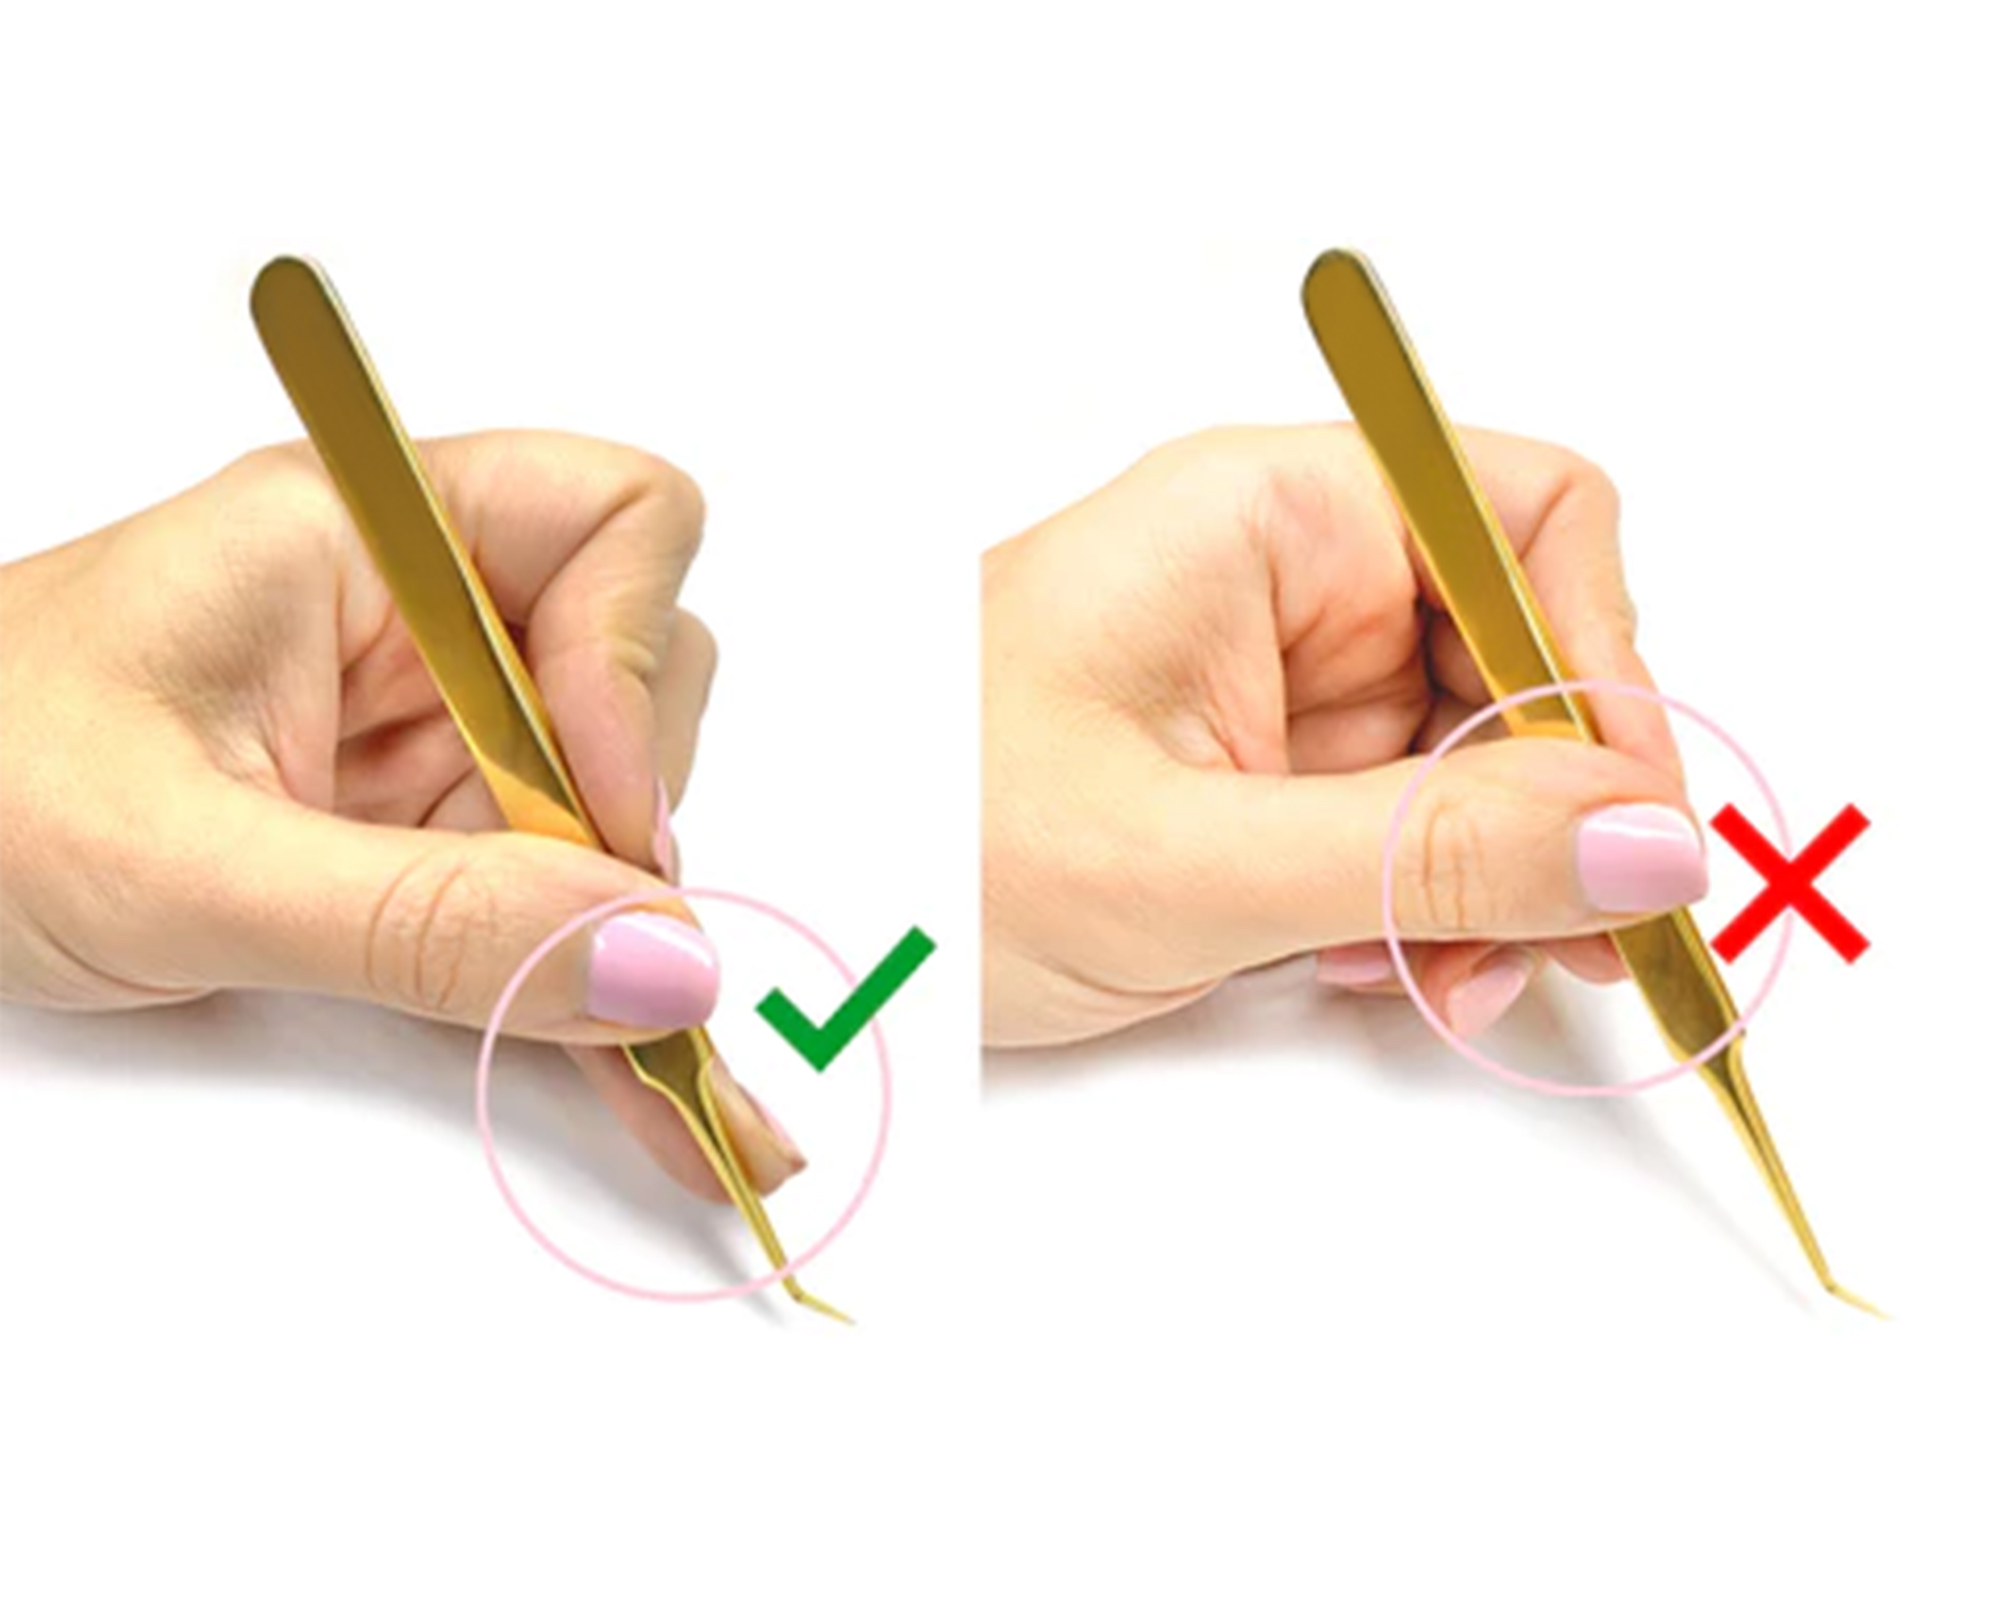 How to Correctly Hold Professional Lash Extension Tweezers